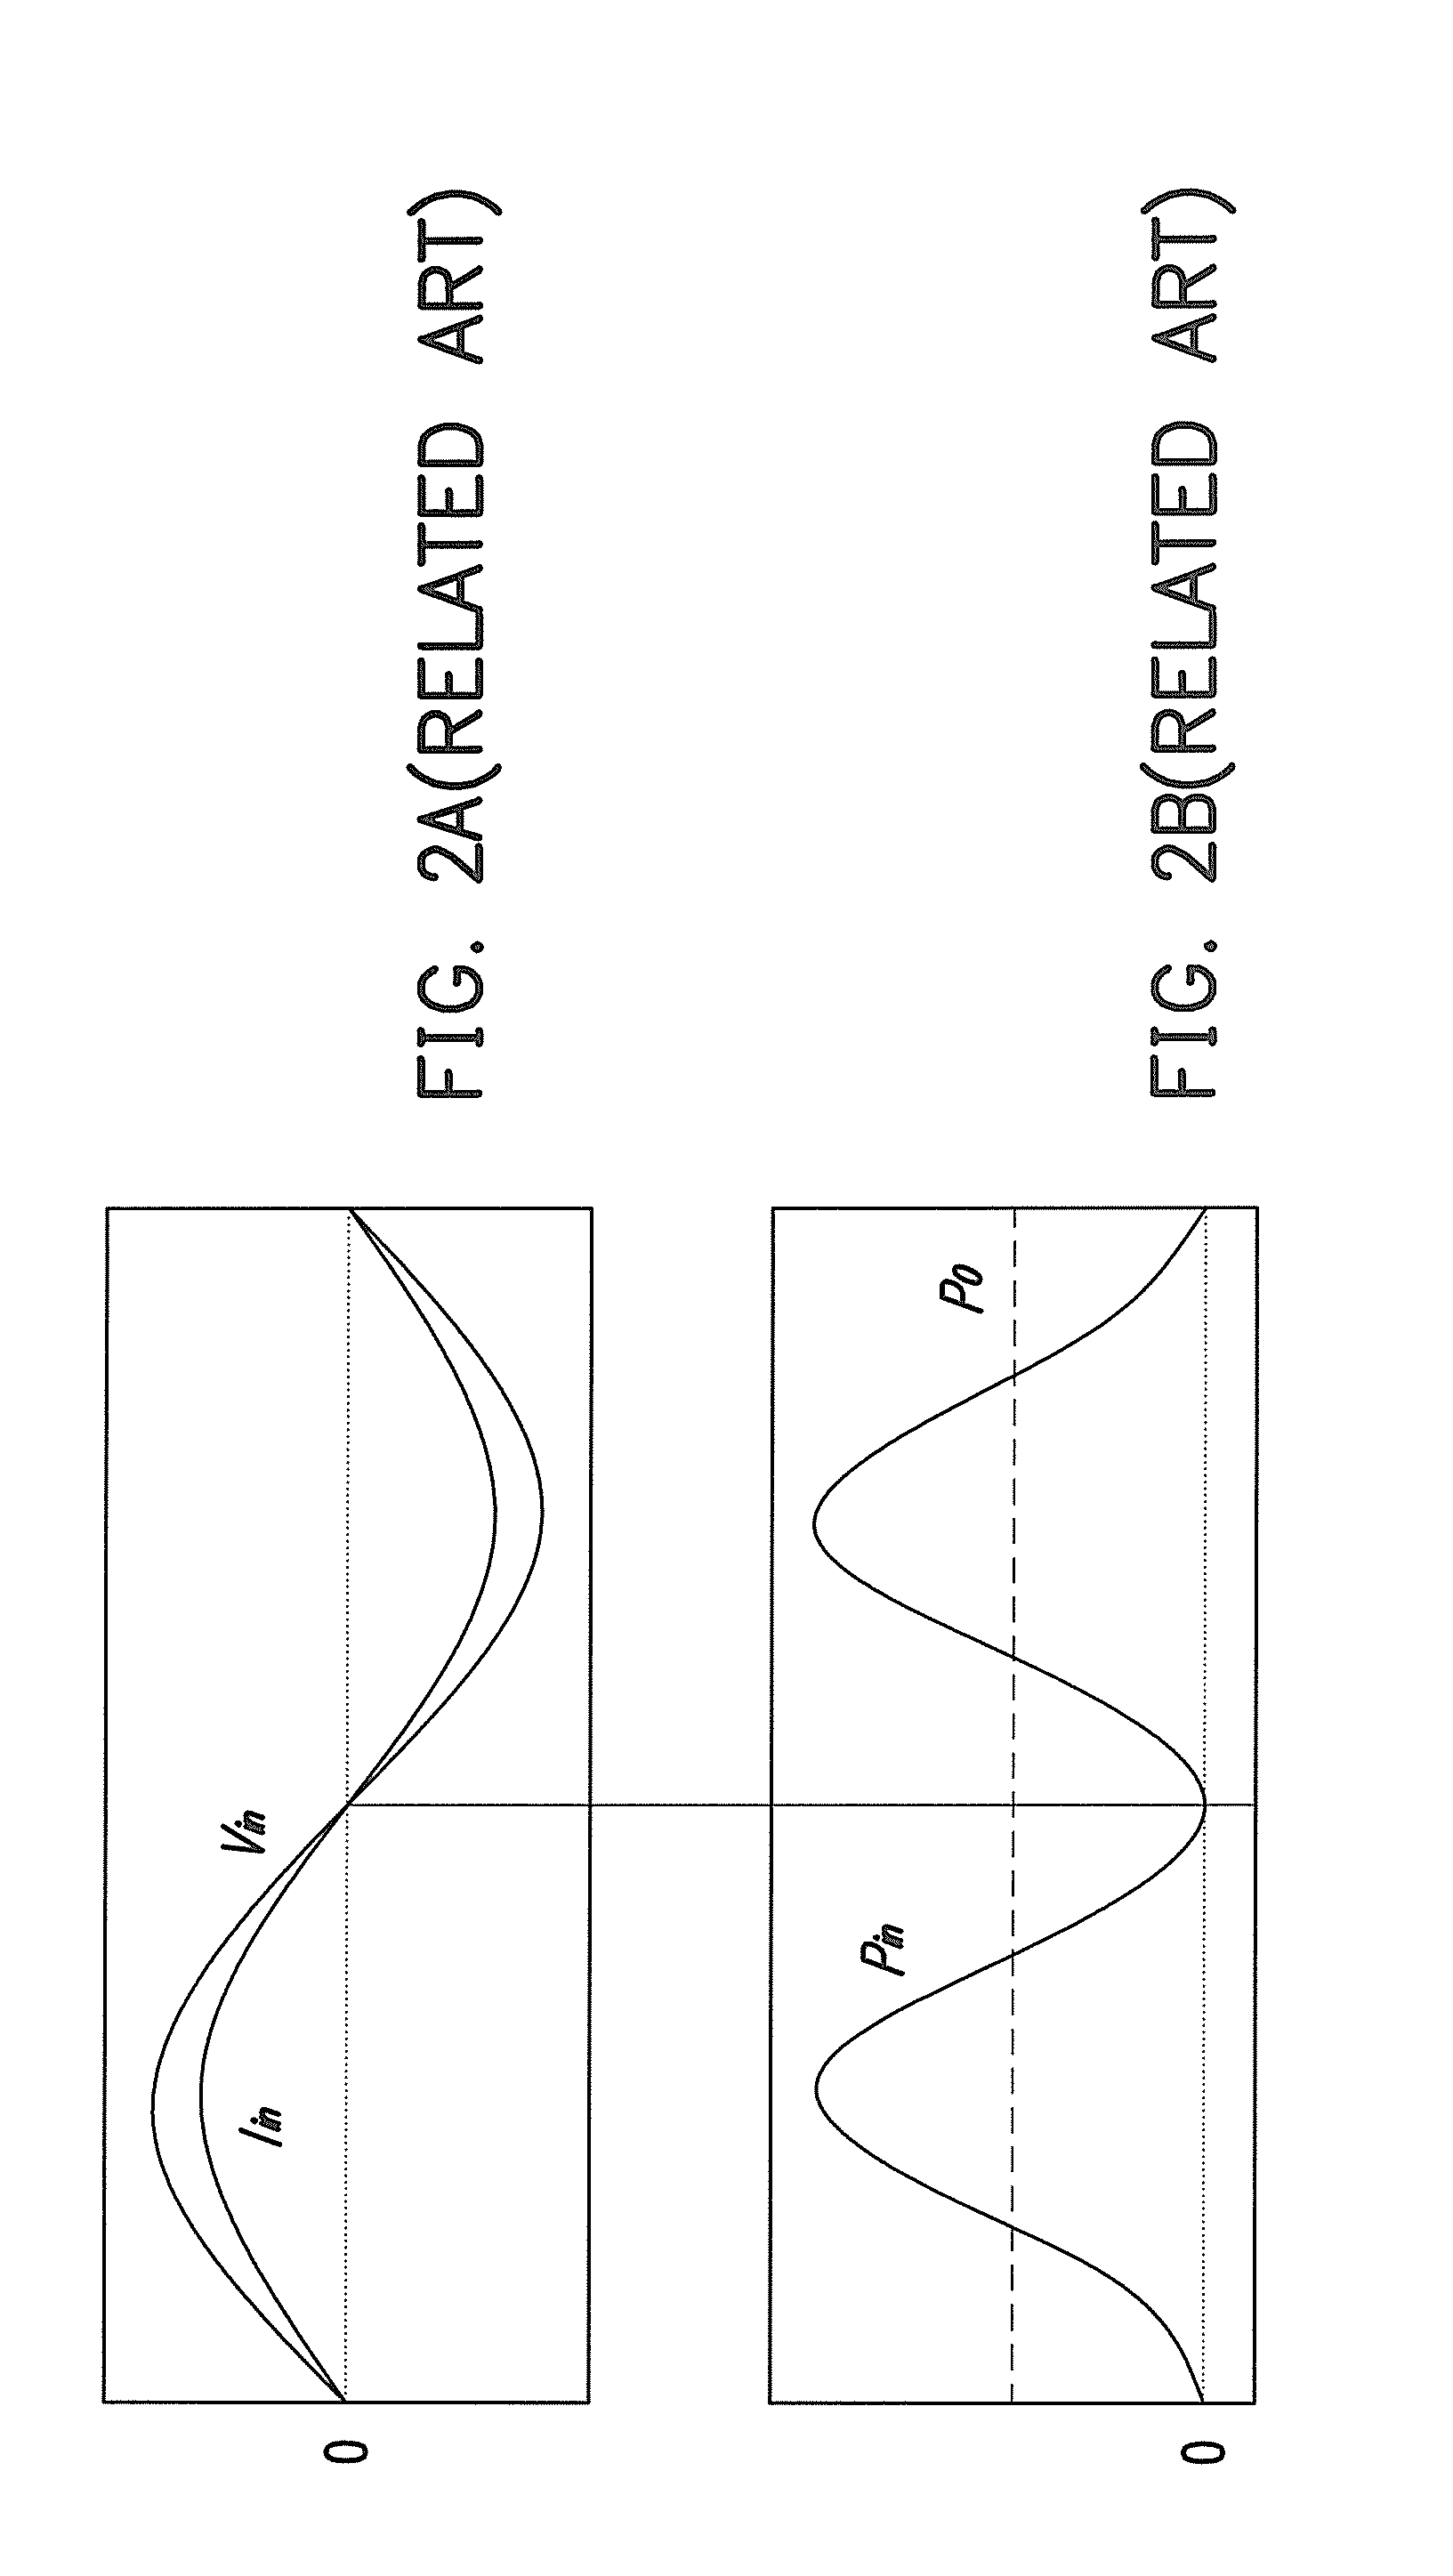 Driving apparatus for light emitting diodes